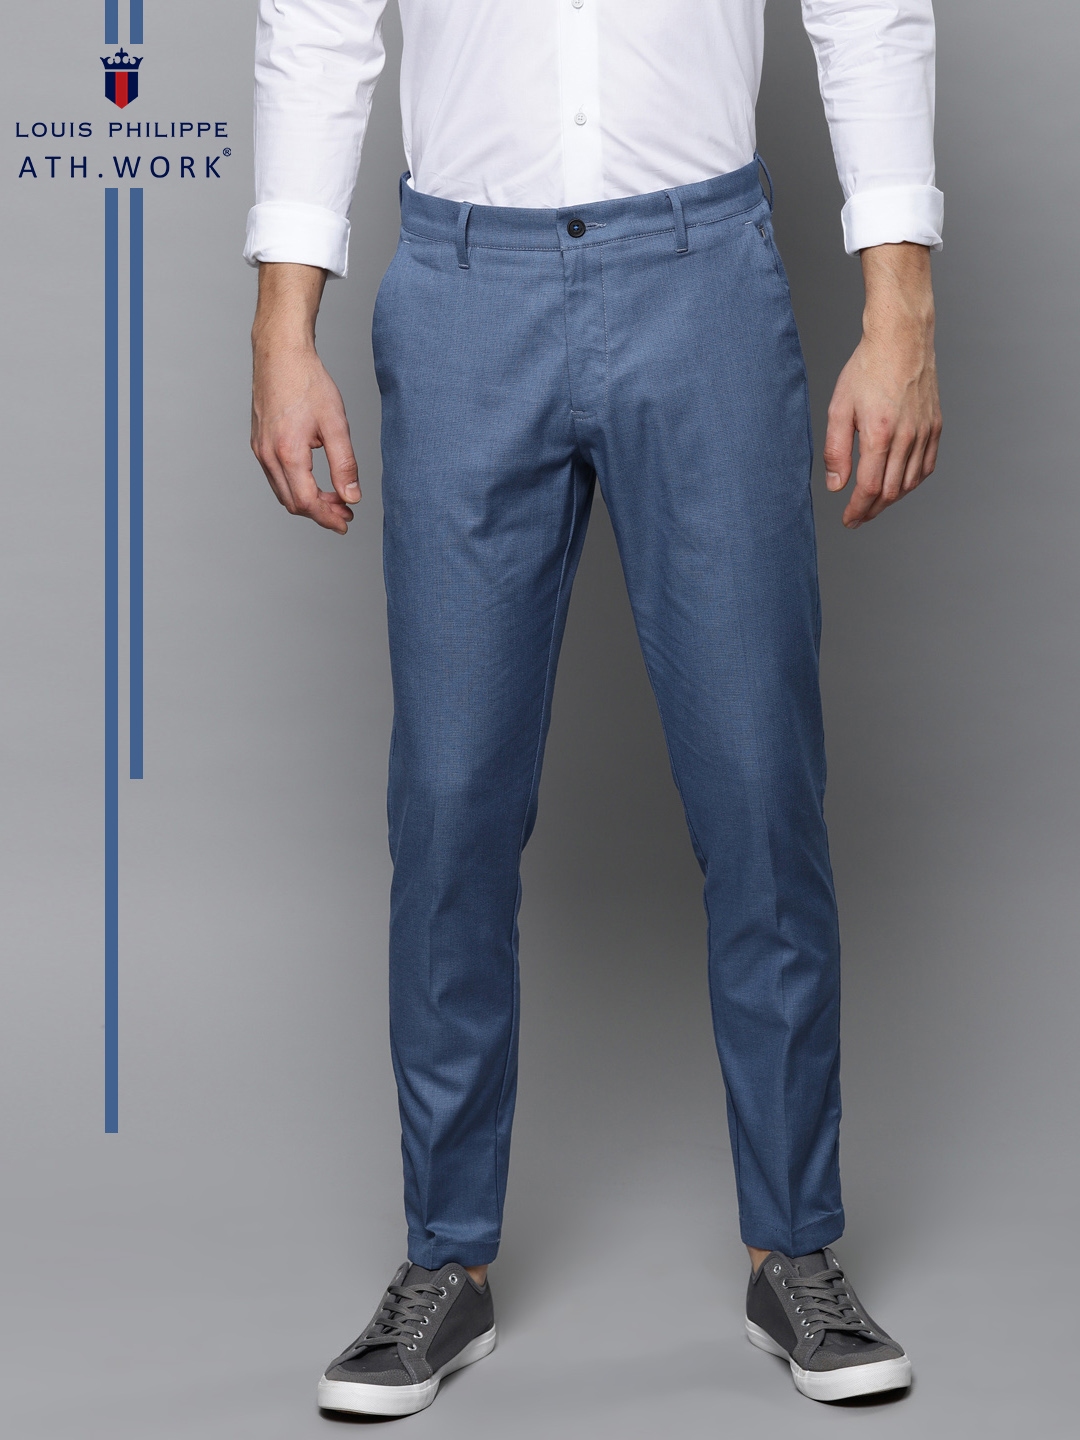 tapered work trousers mens